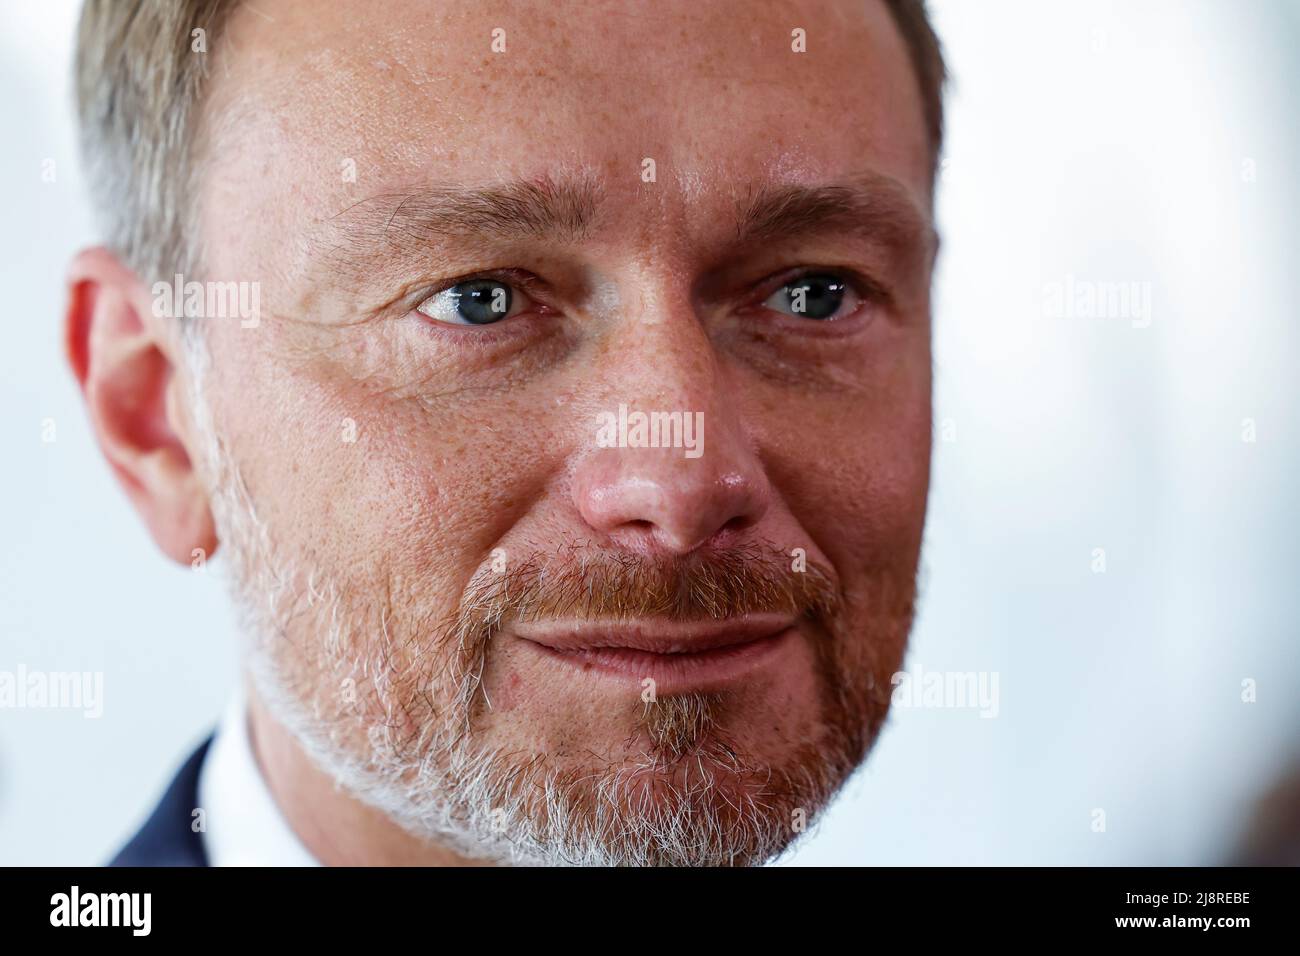 German Finance Minister Christian Lindner attends the weekly cabinet meeting session in the German Federal Chancellery in Berlin, Germany May 18, 2022. REUTERS/Hannibal Hanschke Stock Photo